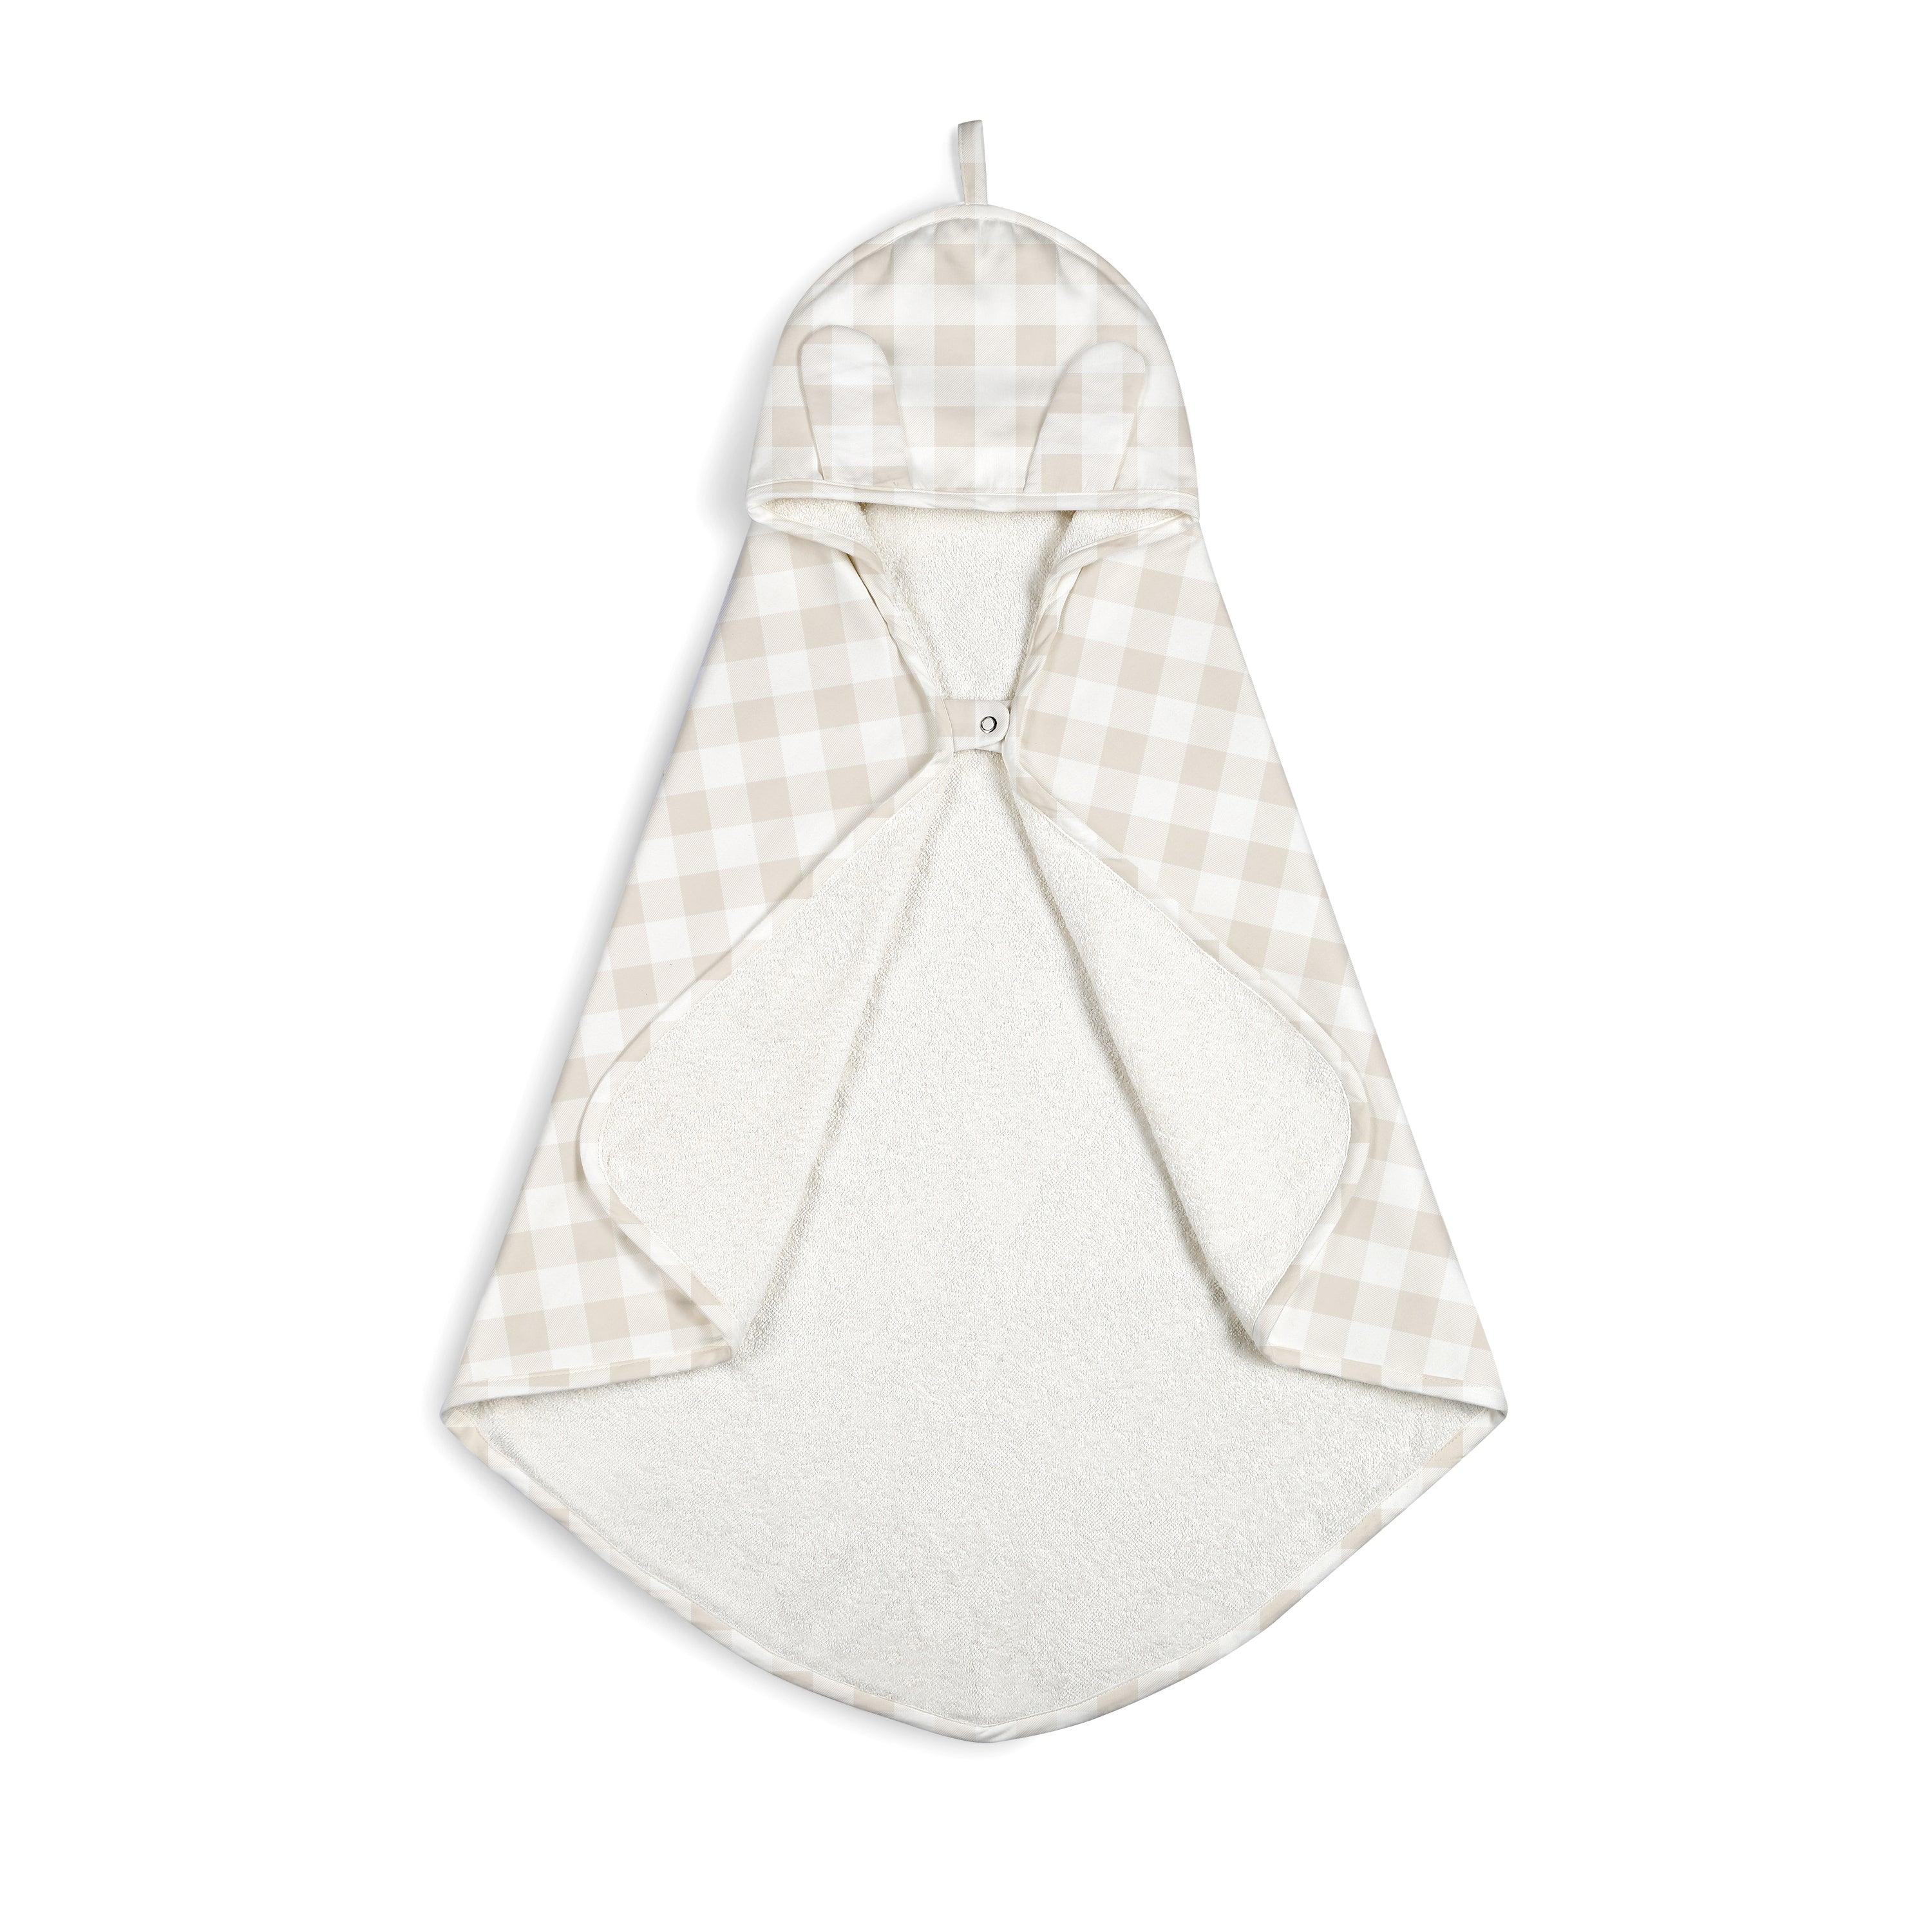 A beige and white checkered Organic Cotton Hooded Baby Towel & Poncho - Plaid from Makemake Organics, displayed flat on a white background.